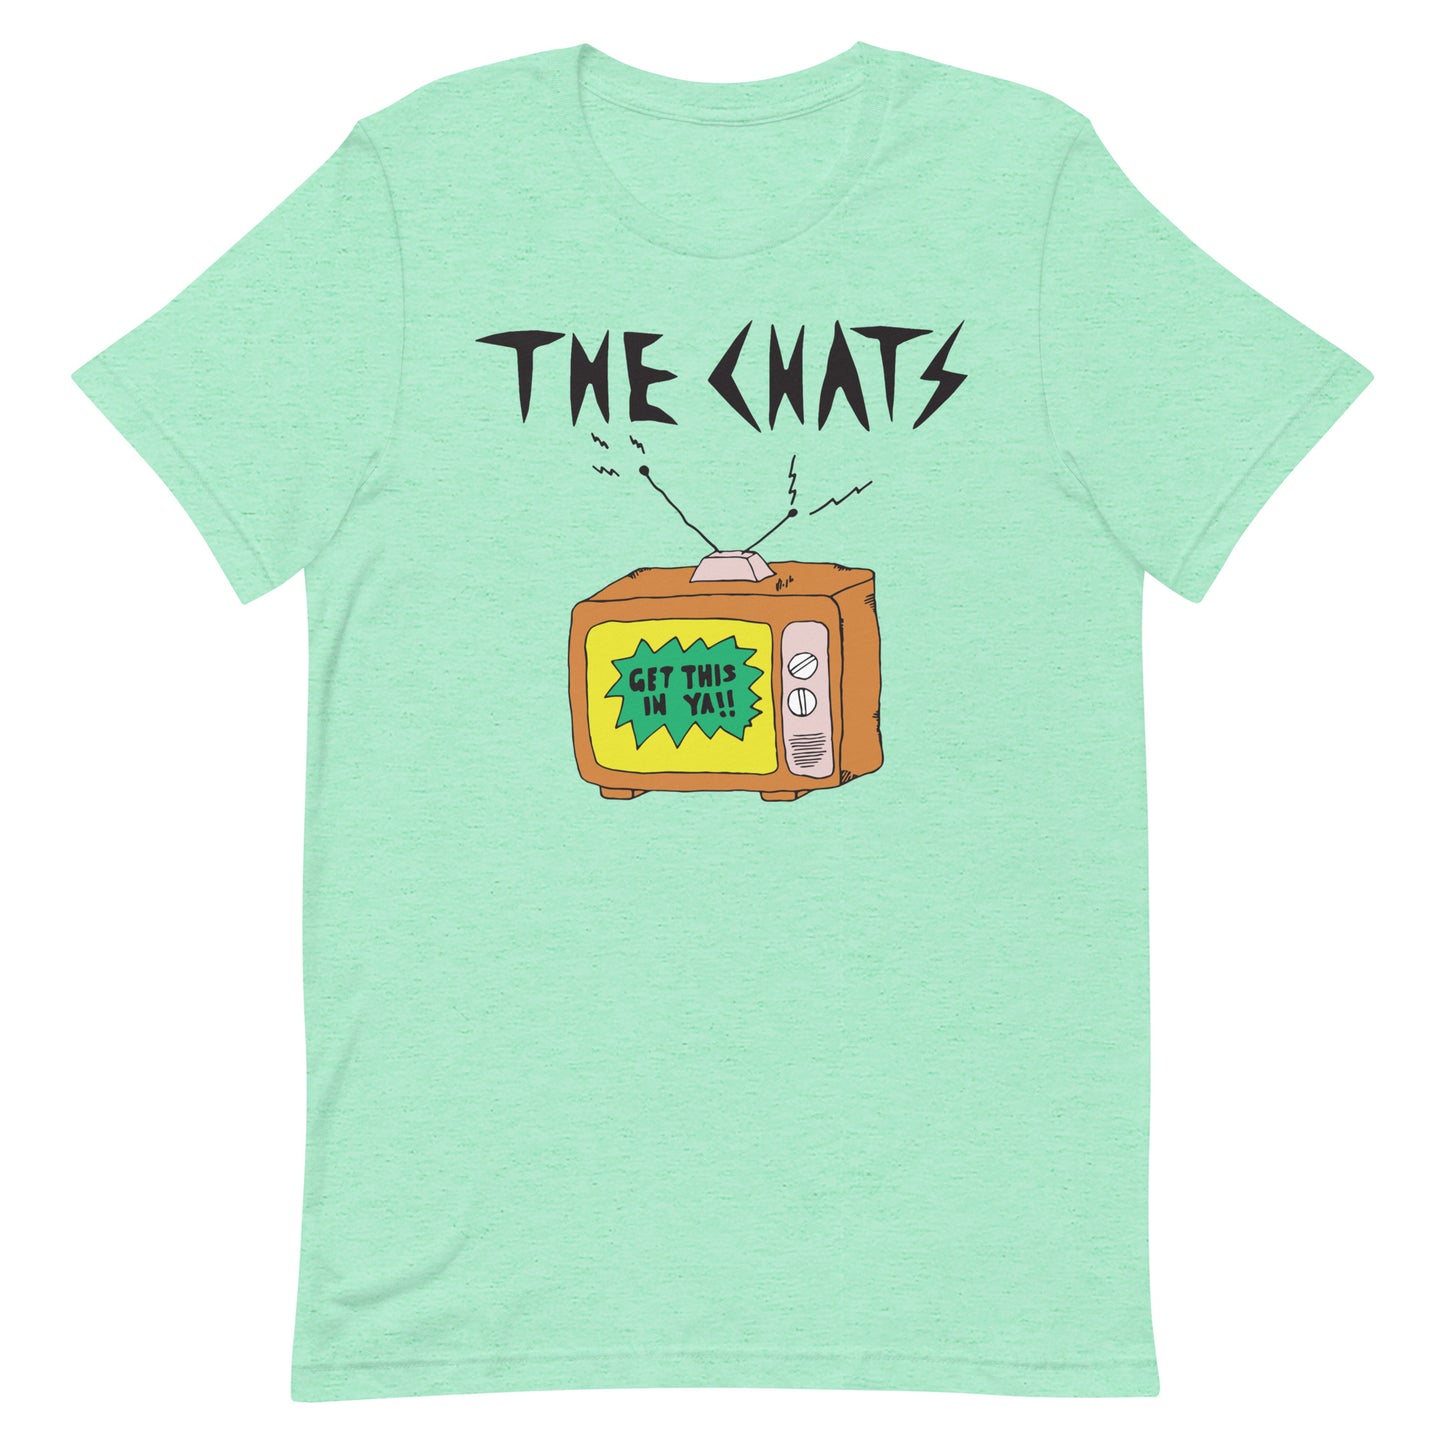 Chats - Get This In Ya!! T-Shirt